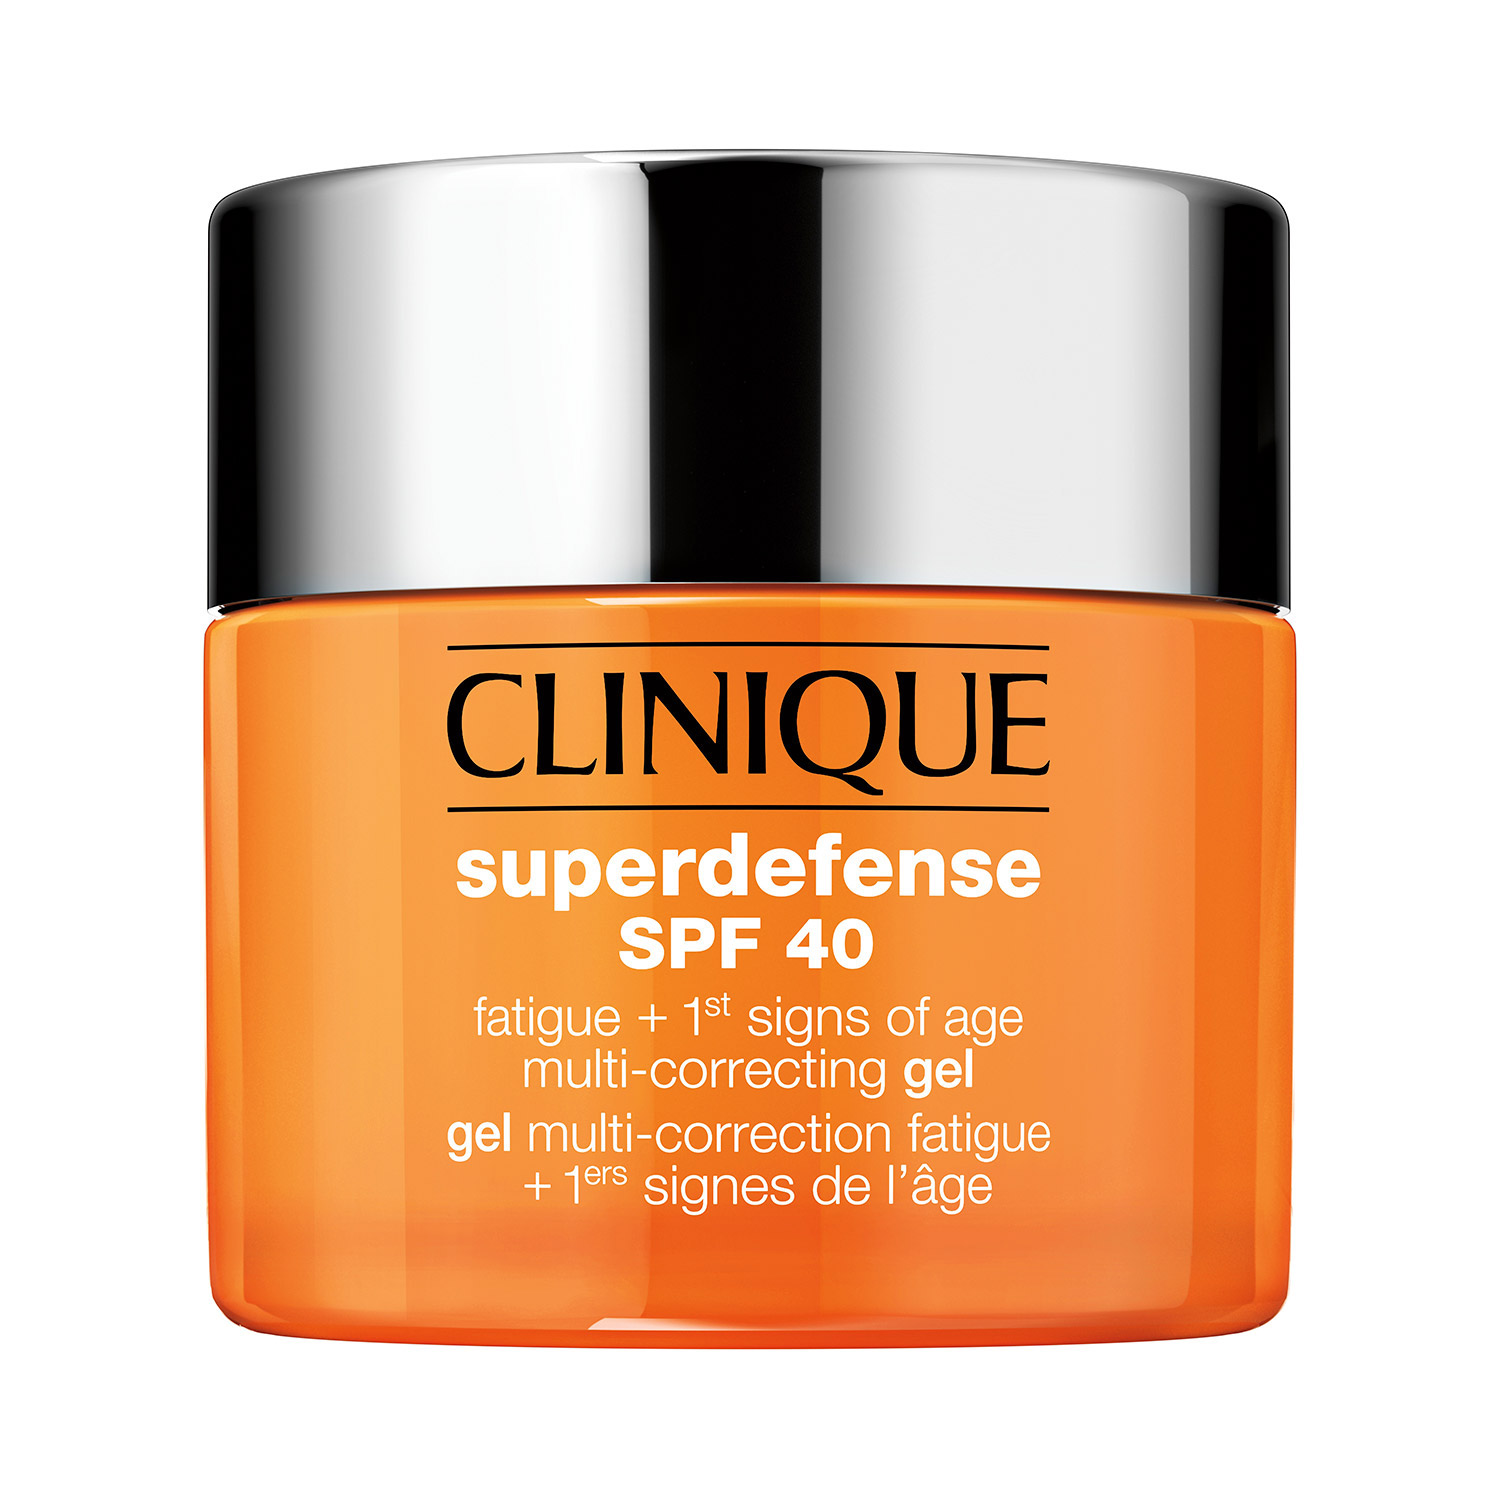 SUPERDEFENSE SPF40 FATIGUE + 1ST SIGNS OF AGE MULTI CORRECTING GEL